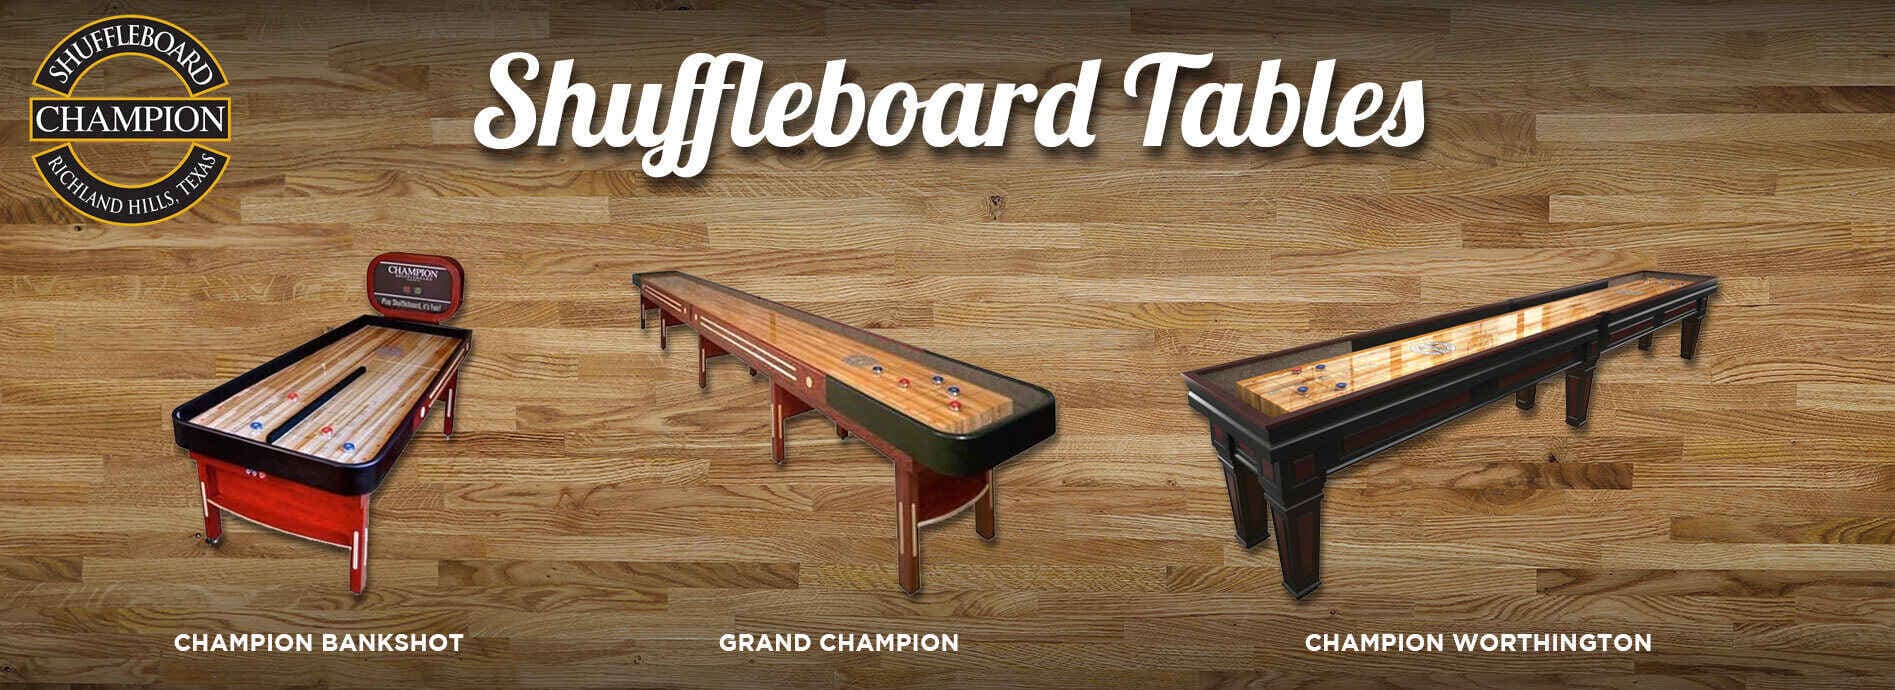 shuffleboard tables for your home or business by Game Exchange in Denver